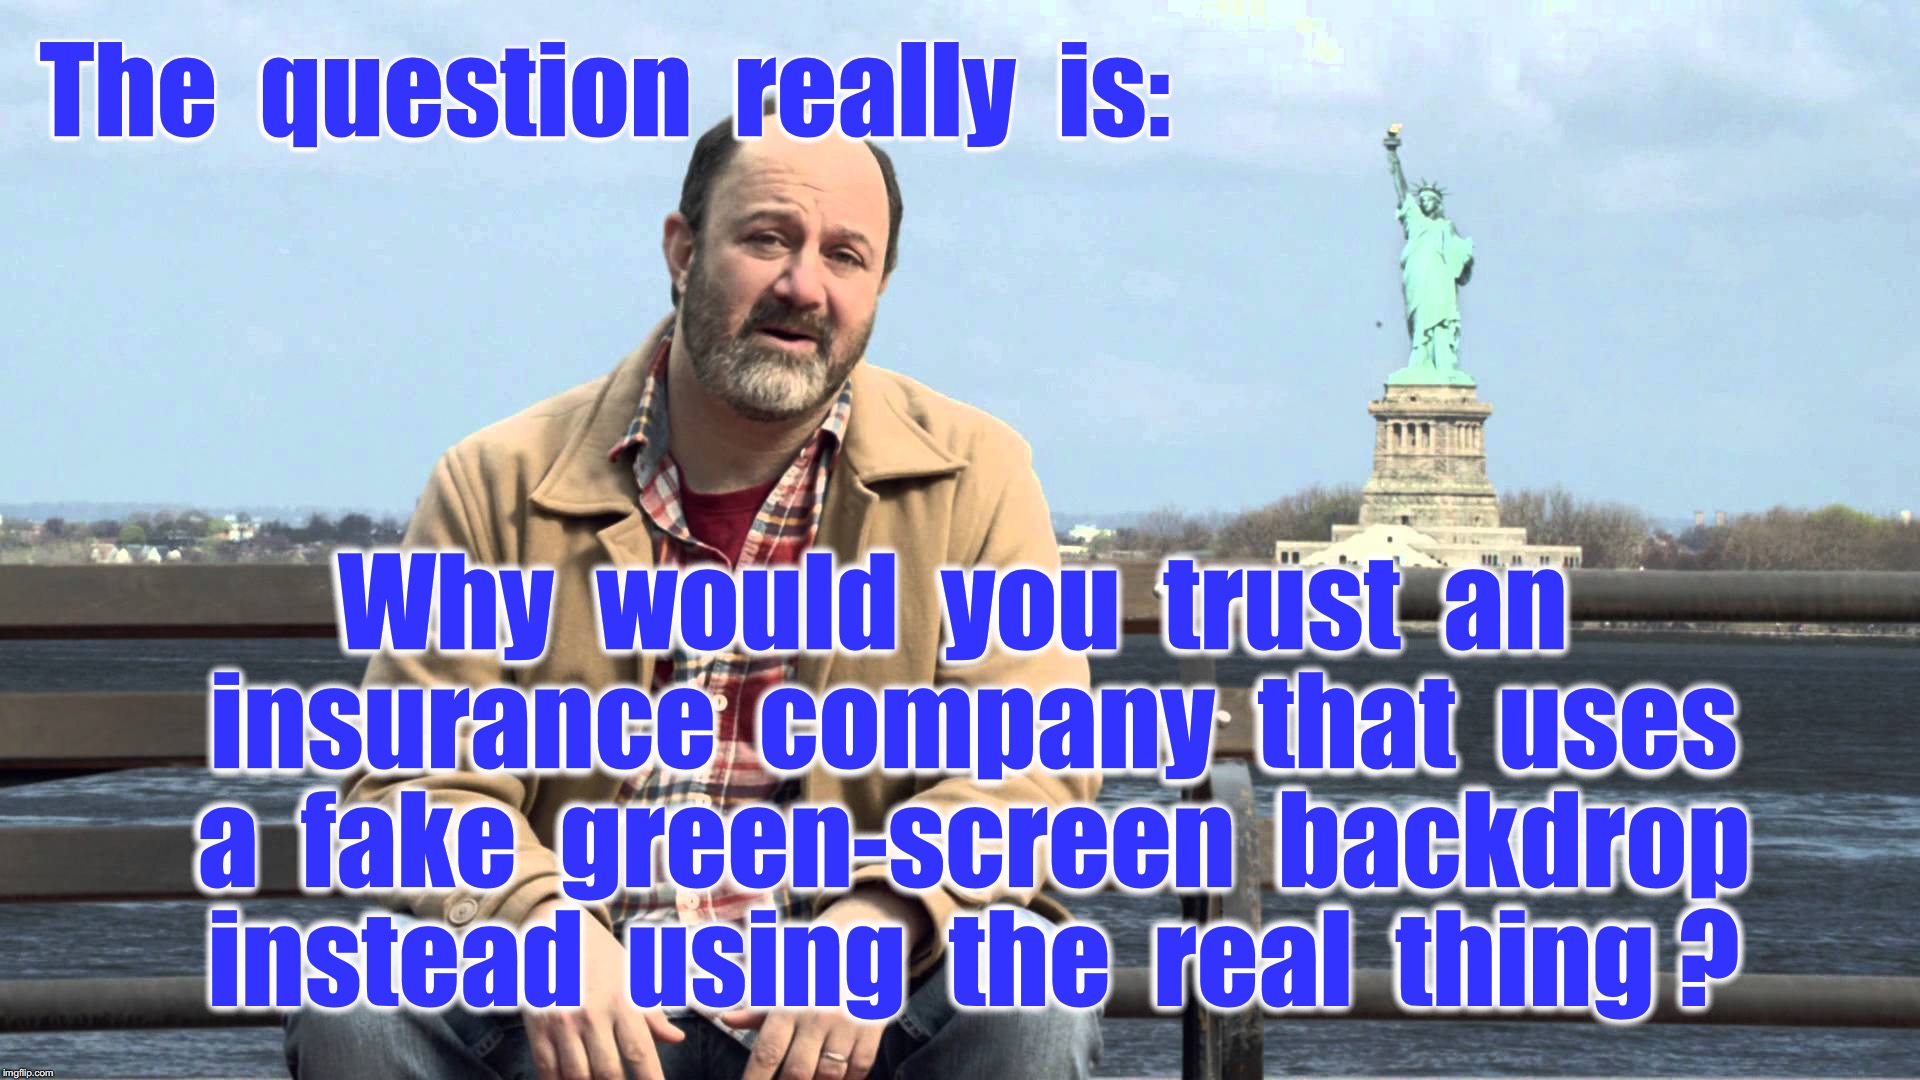 statue of liberty mutual | The  question  really  is:; Why  would  you  trust  an  insurance  company  that  uses  a  fake  green-screen  backdrop  instead  using  the  real  thing ? | image tagged in statue of liberty mutual | made w/ Imgflip meme maker